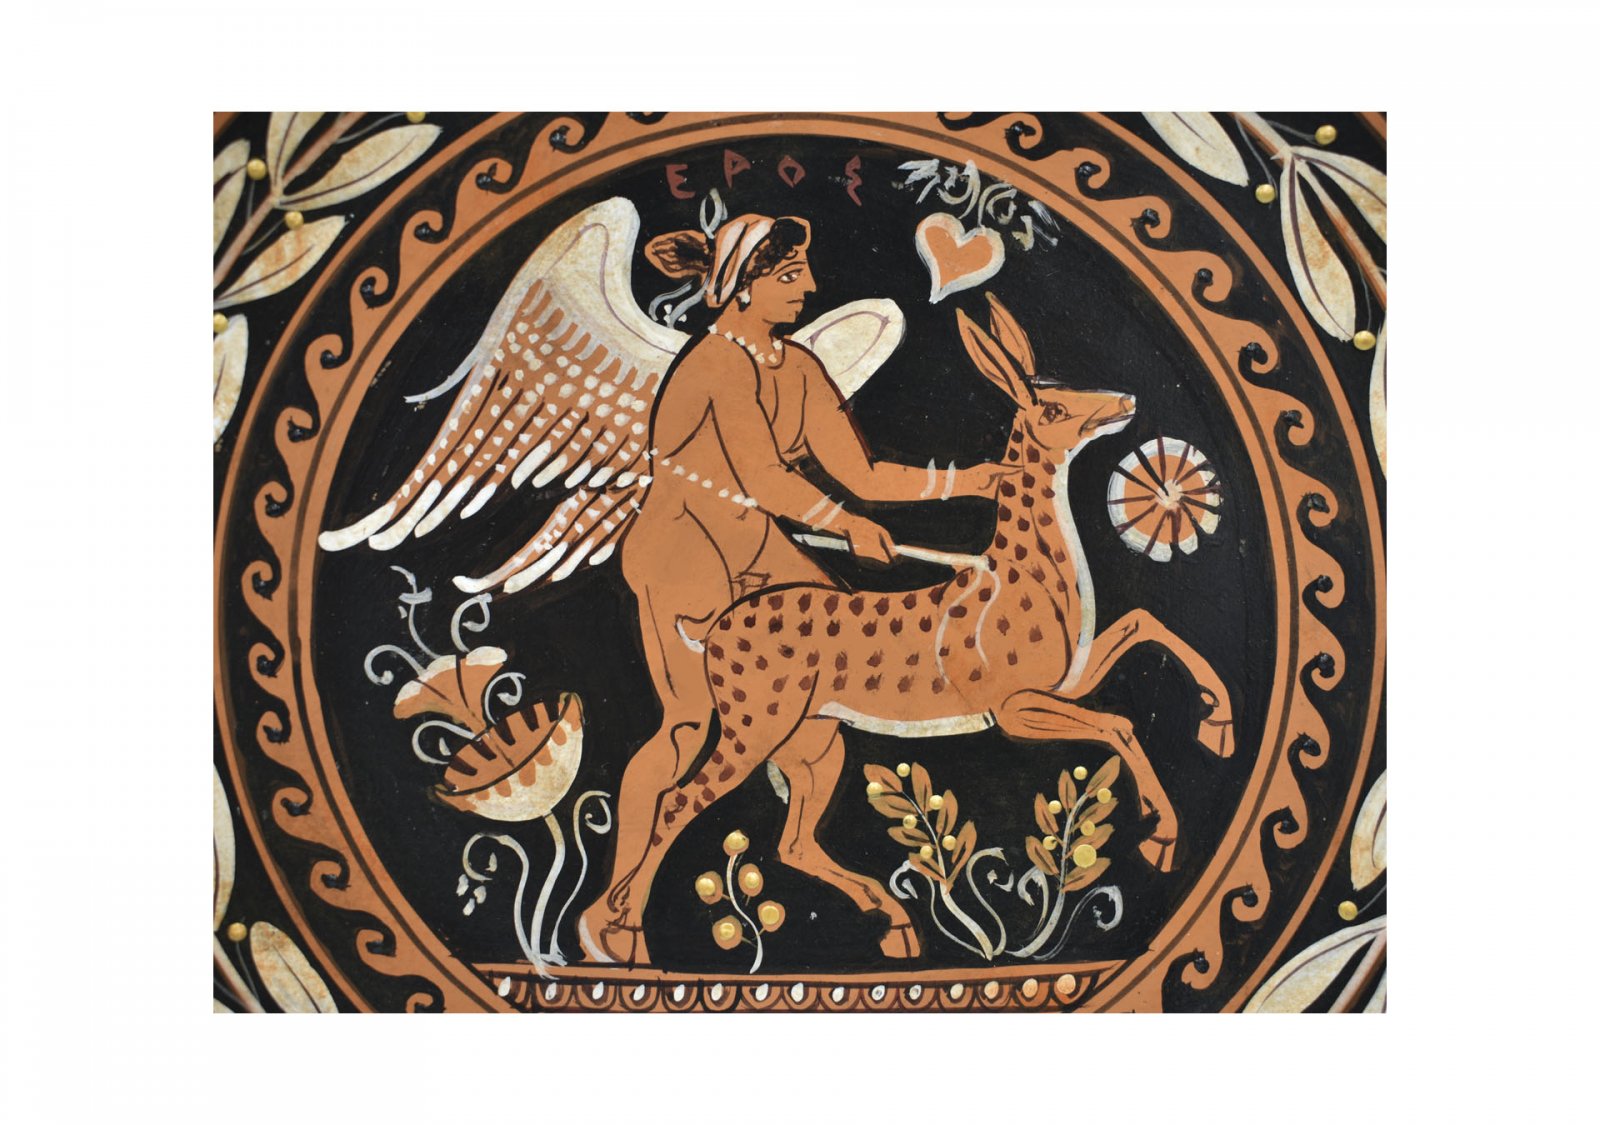 Greek ceramic plate depicting Eros, the Greek god of love, with a fawn